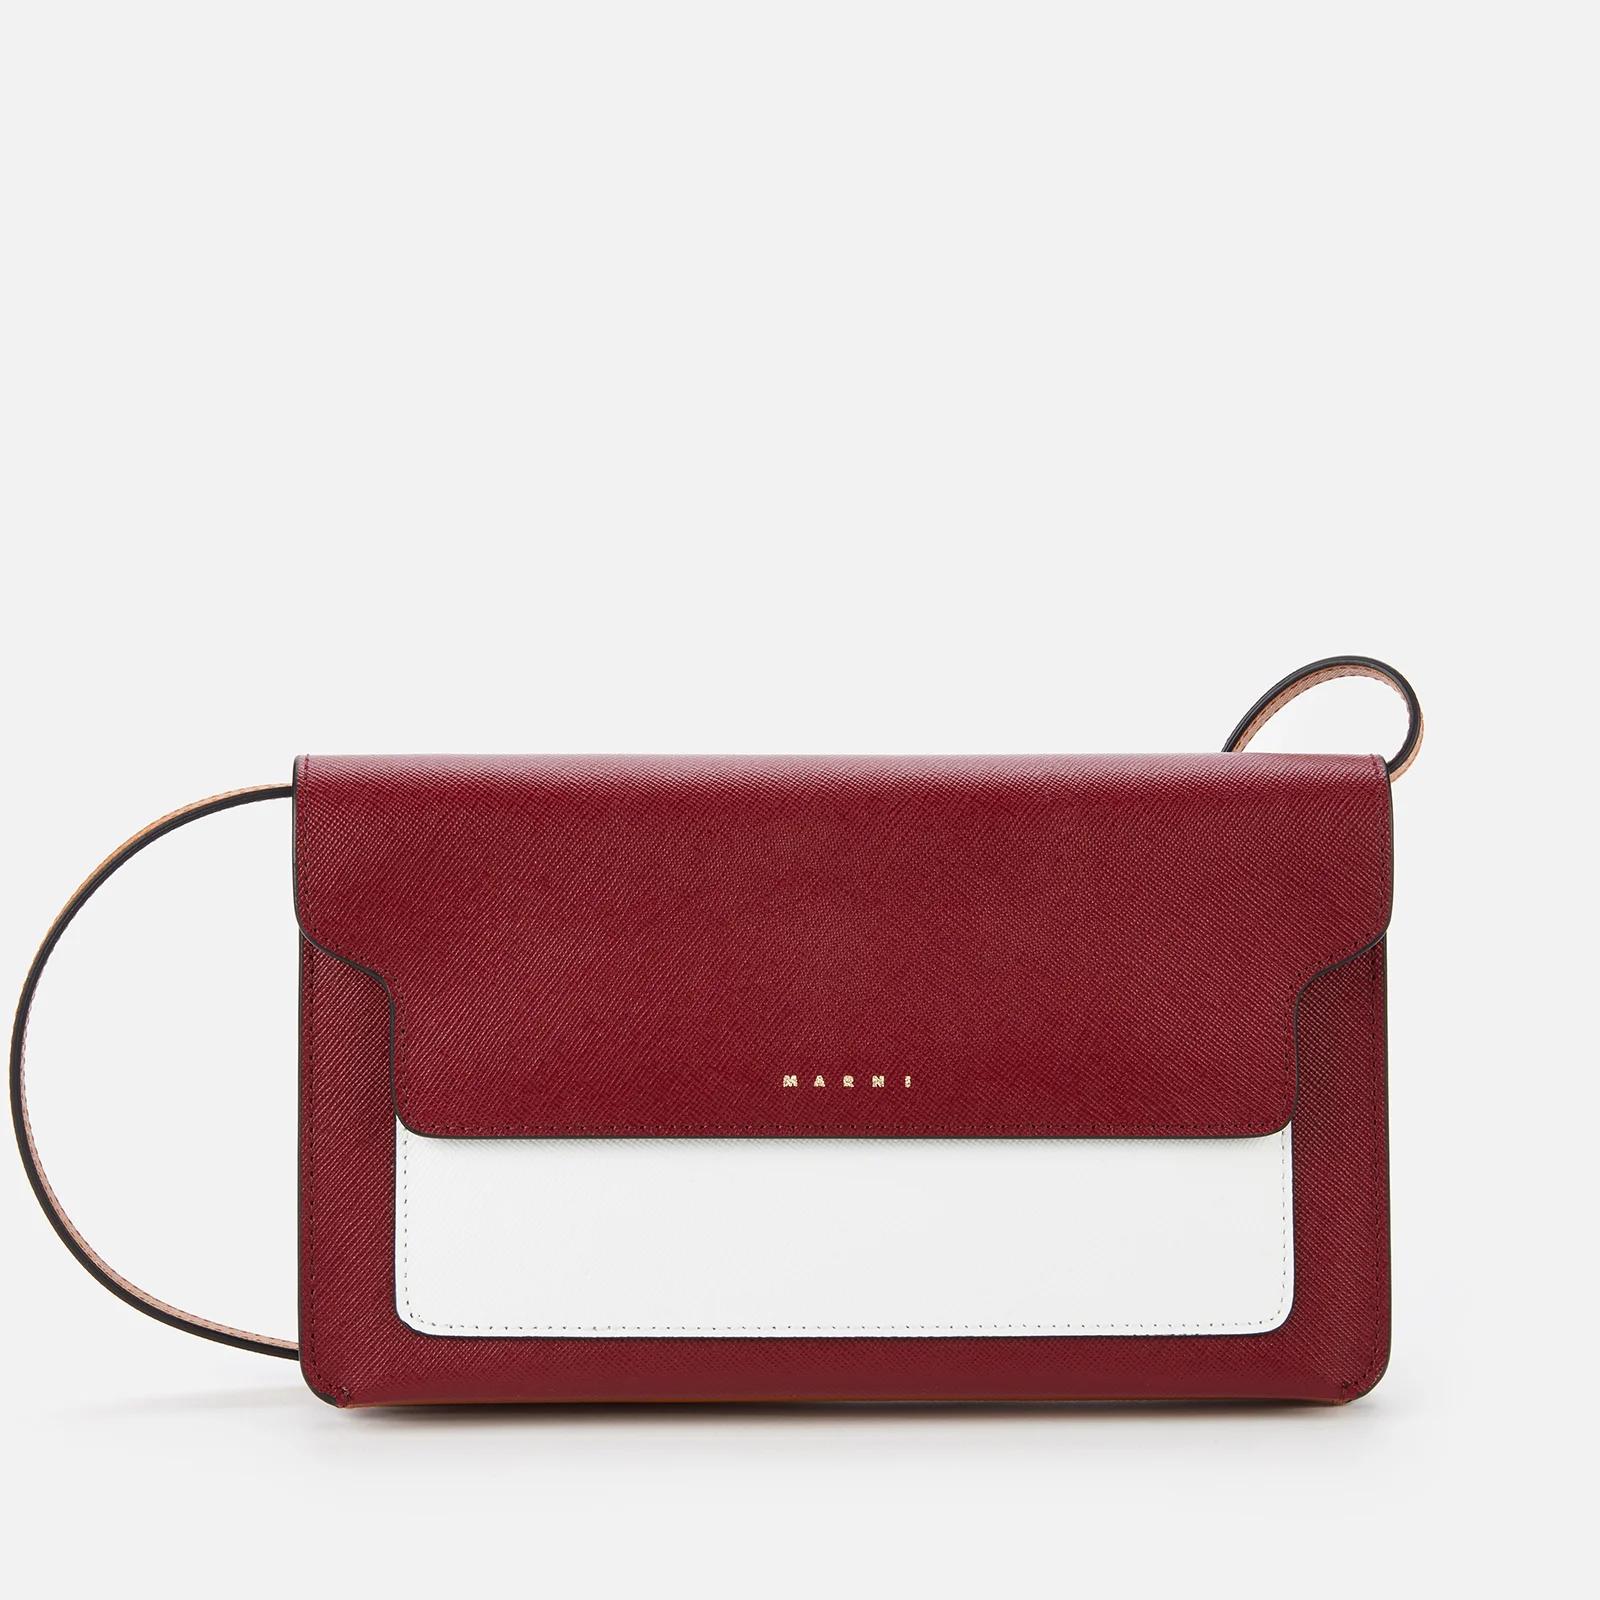 Marni Women's 3 Comp Pouch W/Strap - Deep Red/White Image 1